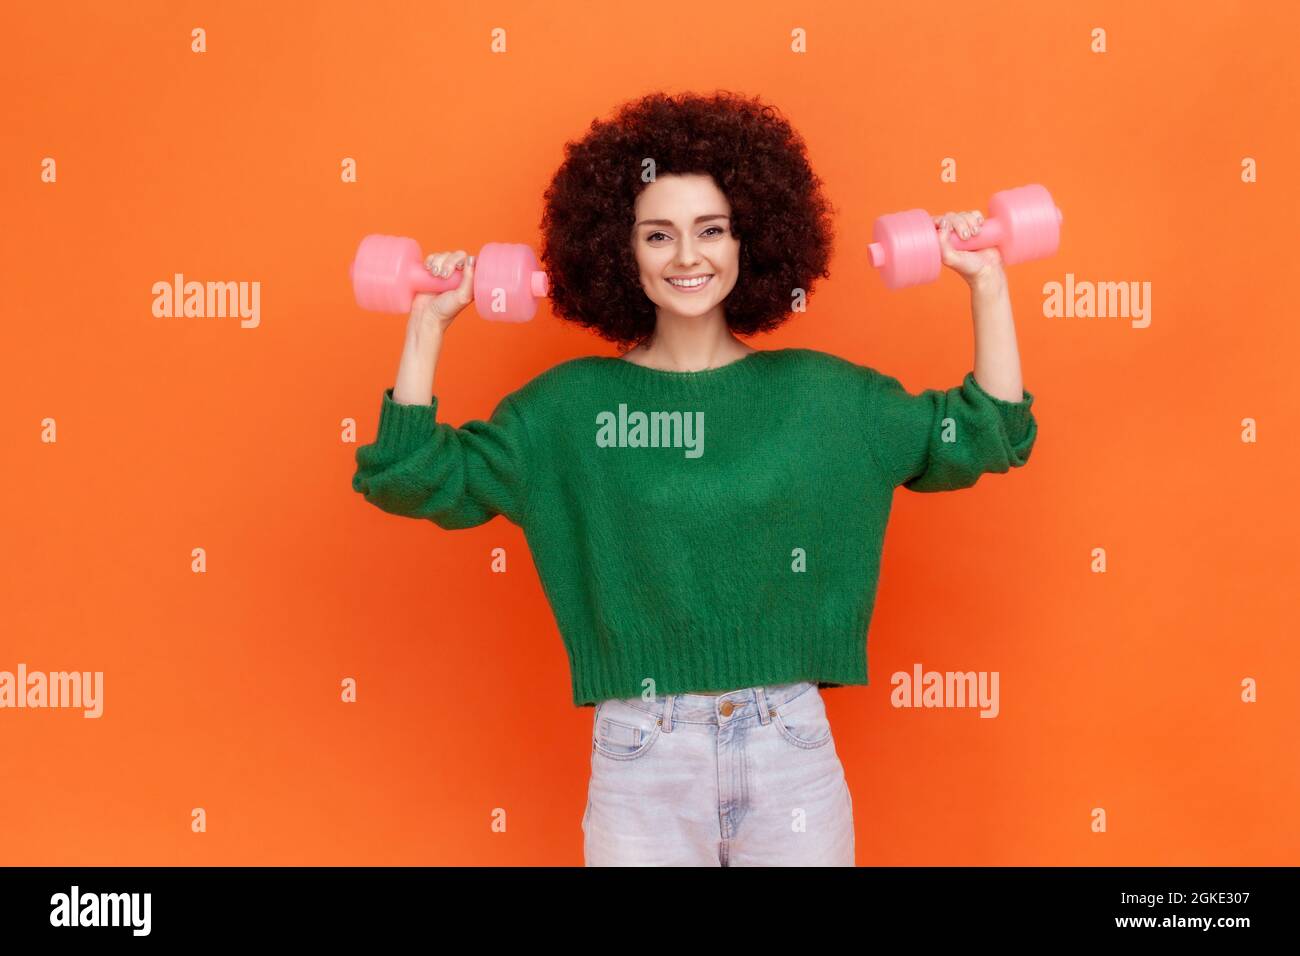 Positive woman with Afro hairstyle wearing green casual style sweater raising arms with pink dumbbells, training biceps and triceps, healthy lifestyle Stock Photo